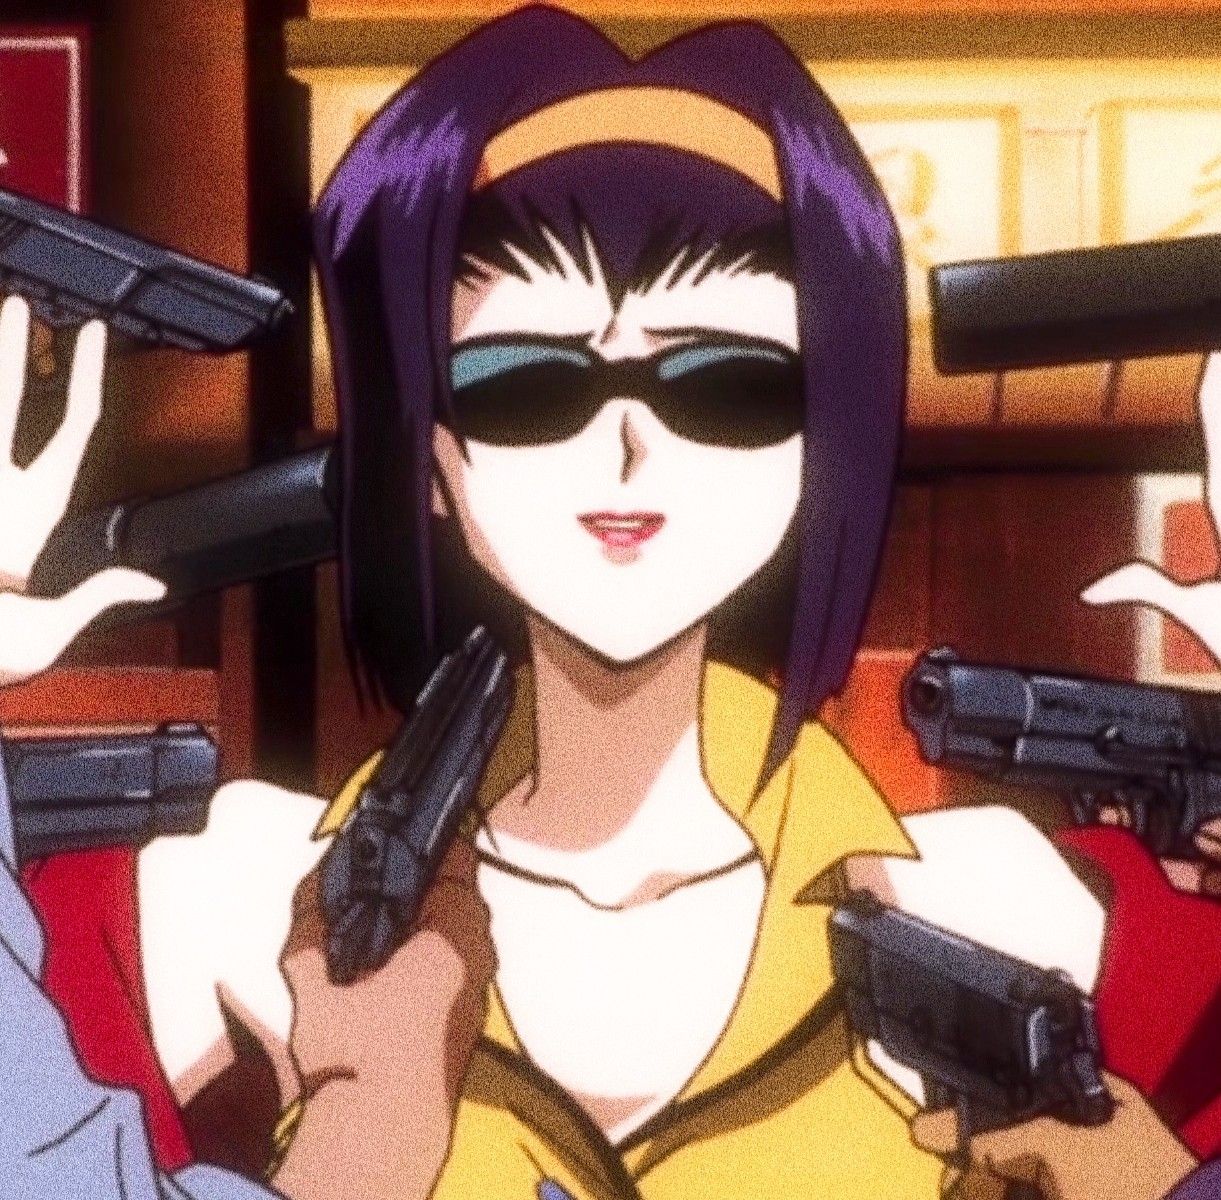 Netflix’s Cowboy Bebop Series Will Not Be “One-to-One” Adaptation, Faye